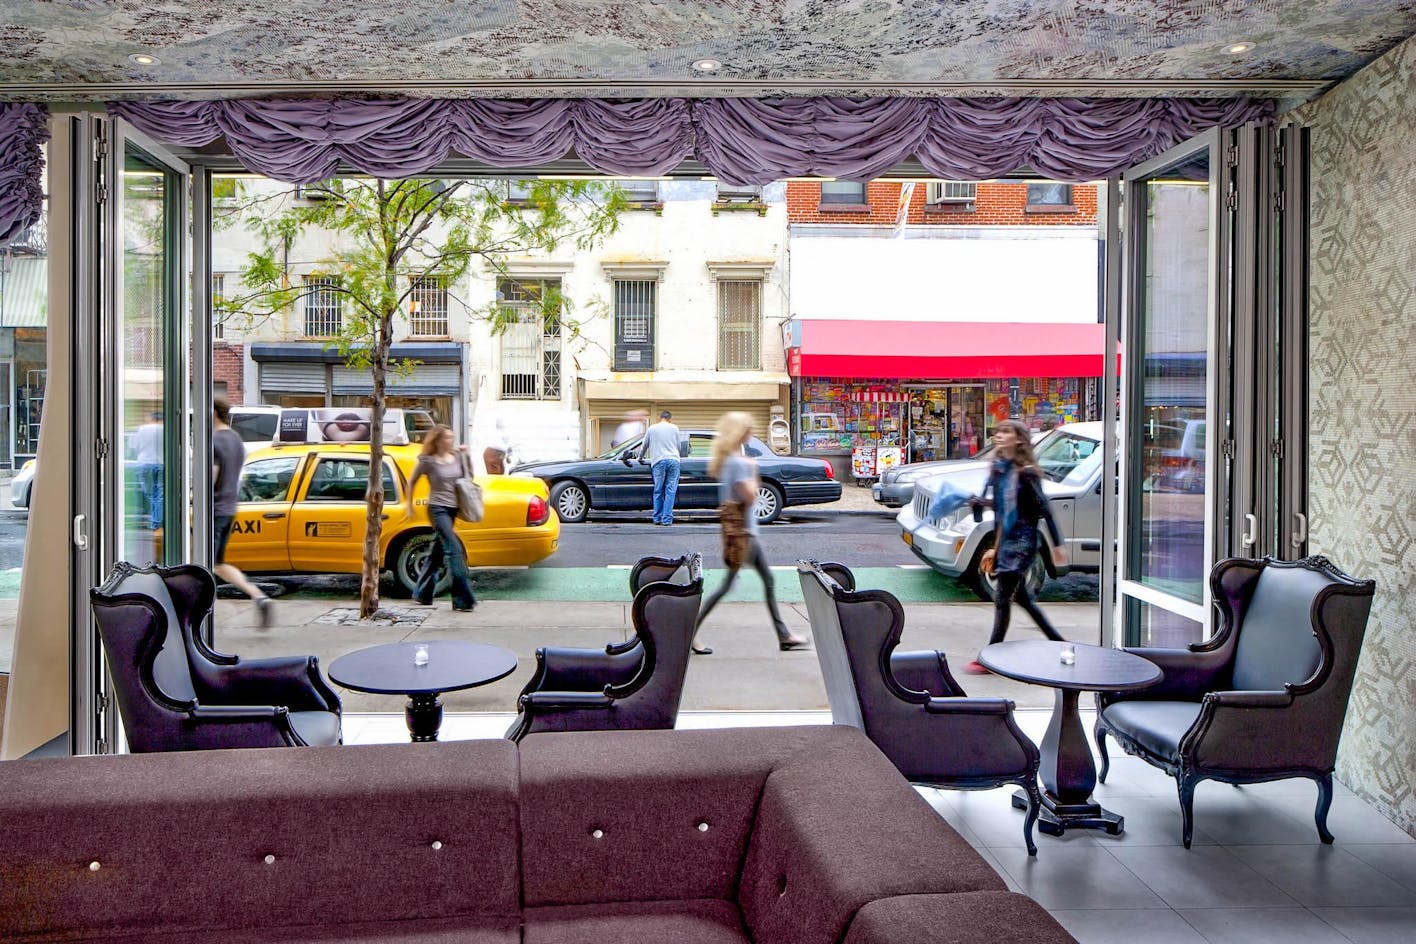 commercial moving glass walls open restaurant to street for fresh air